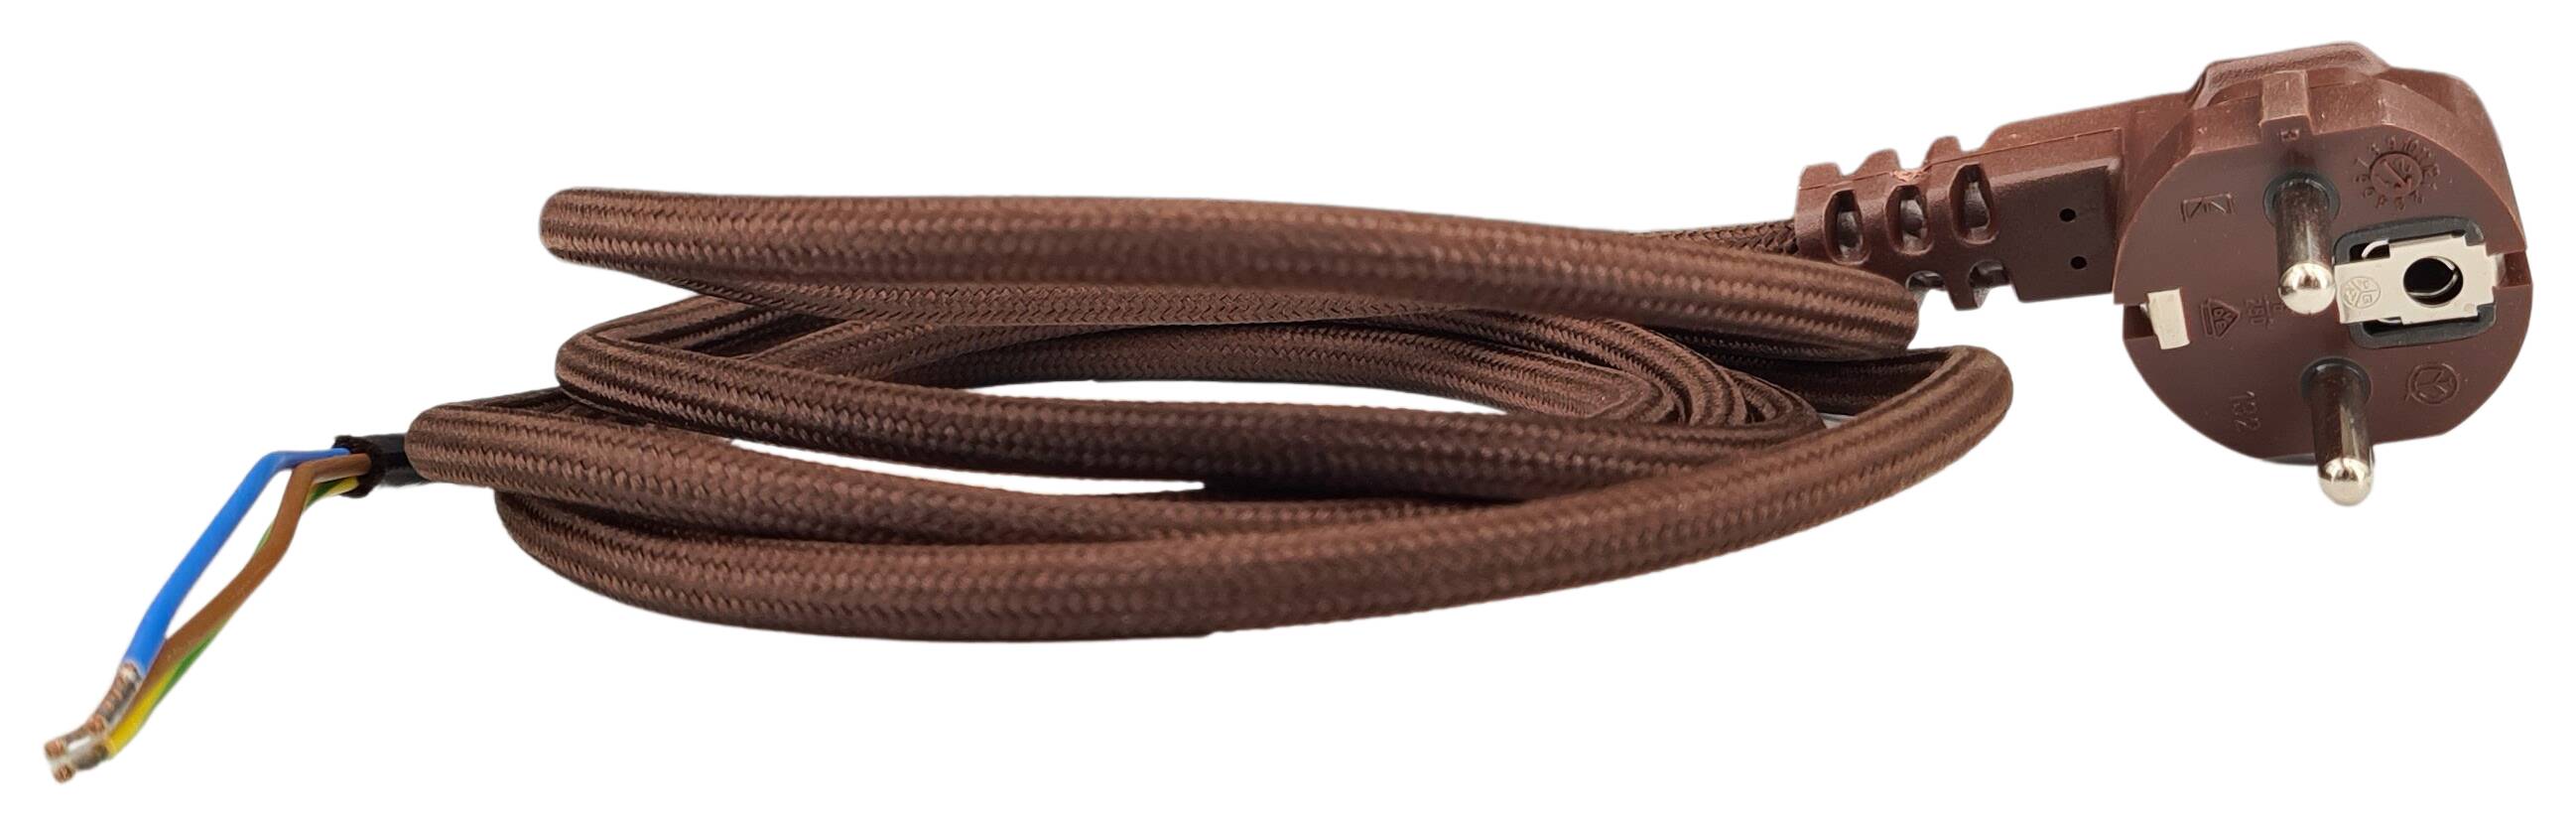 cord-set 3G 0,75/1100 round with schuko angled plug textile coated cable colour 285 brown